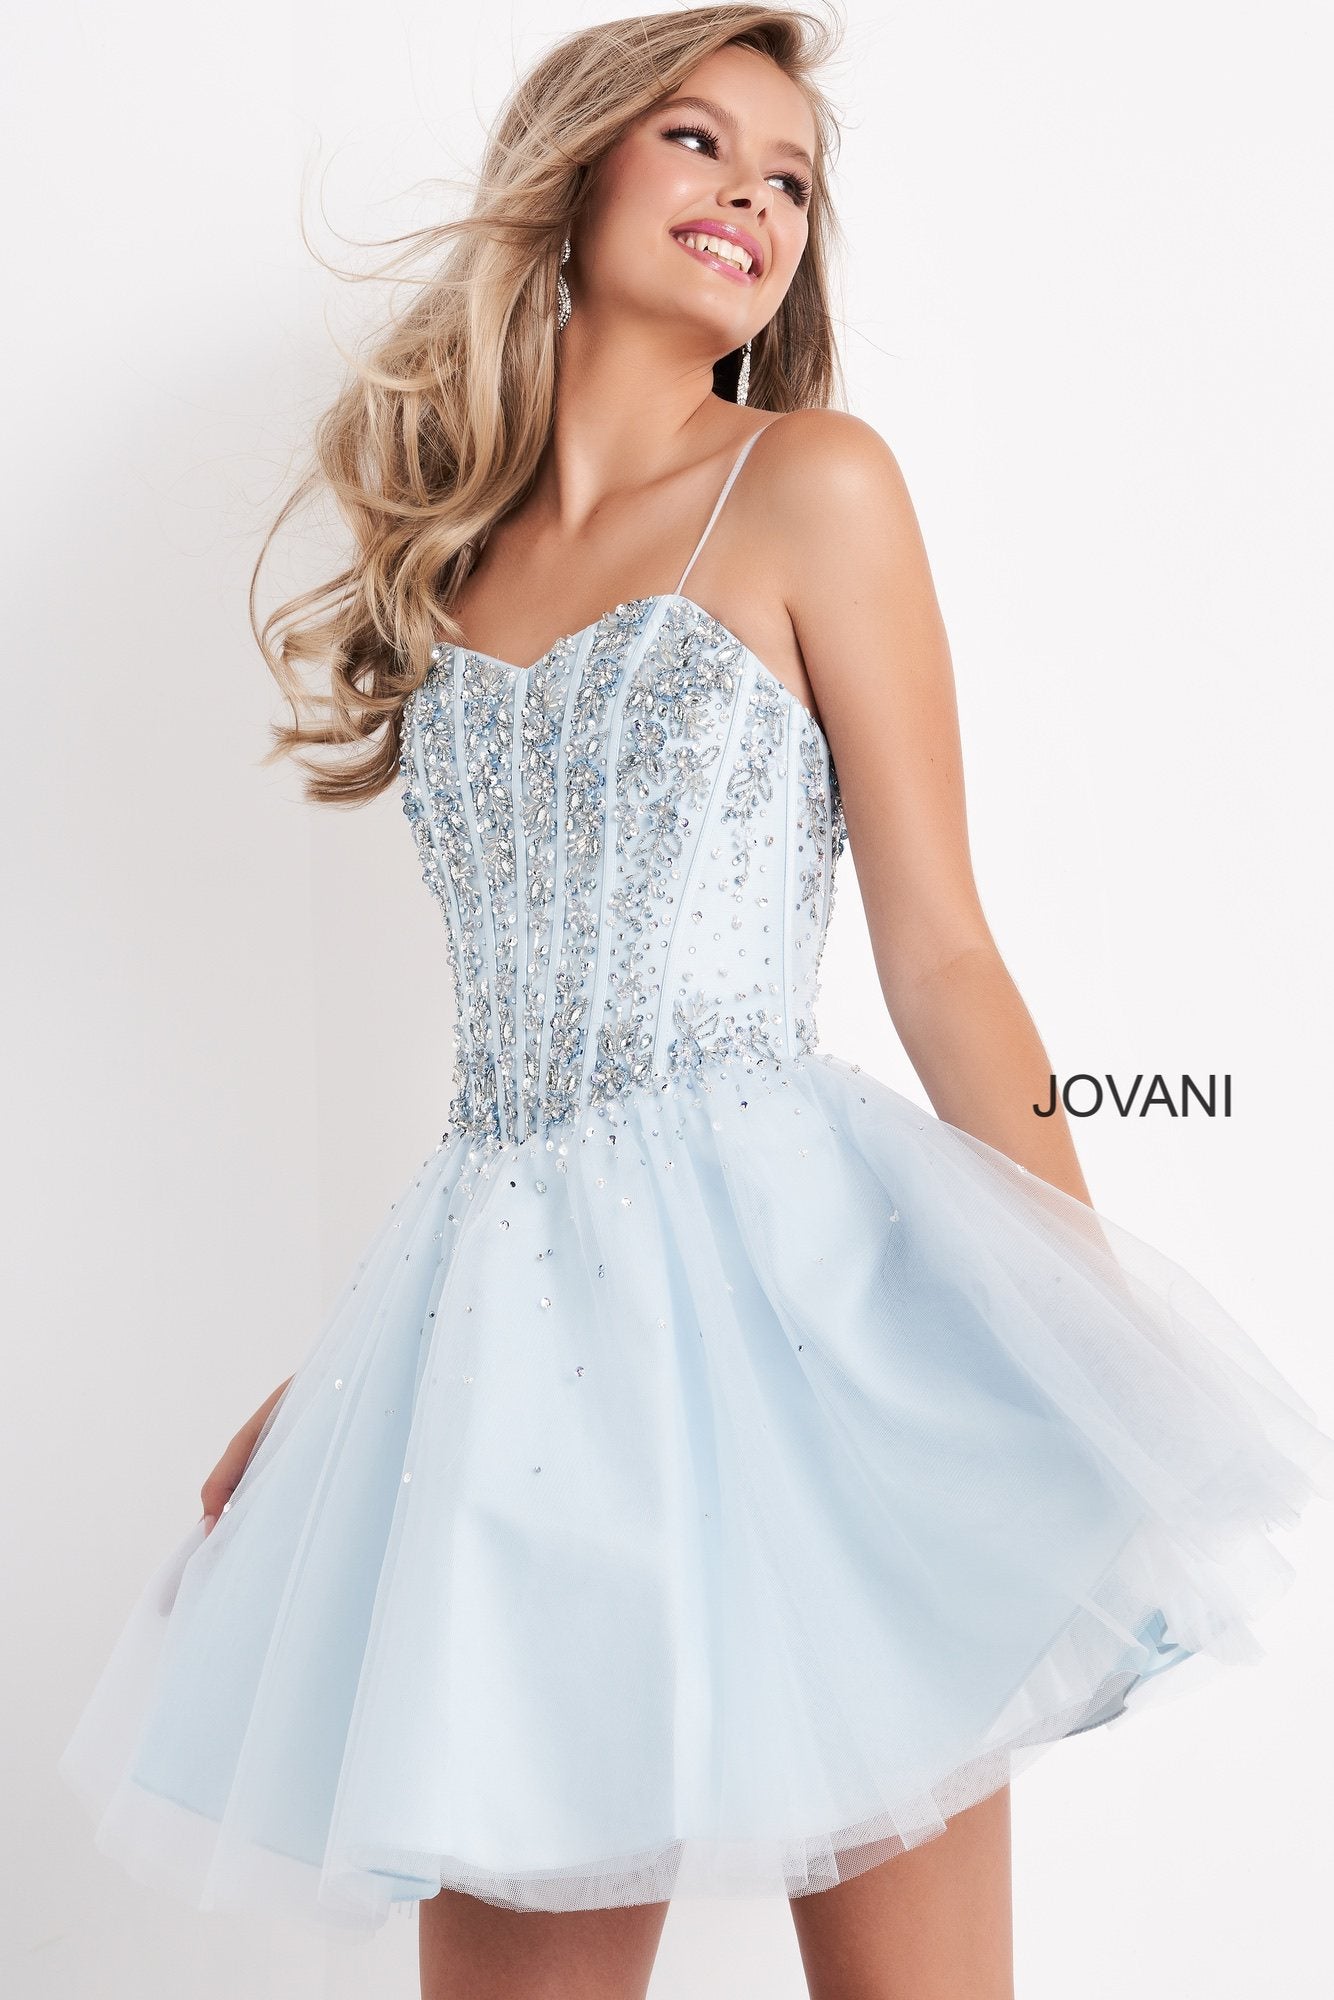 Jovani Kids k62533 is a Short Girls Prom Dress, Kids Pageant Gown & Pre Teen Formal Evening Wear gown. This Short Girls Fit & Flare Dress Features a sweetheart neckline with spaghetti straps. Embellished & Beaded Corset Bodice with boning. Embellishments cascade into the flared tulle skirt.  Available Girls Sizes: 8, 10, 12, 14  Available Colors: Black, Blue, Fuchsia, White